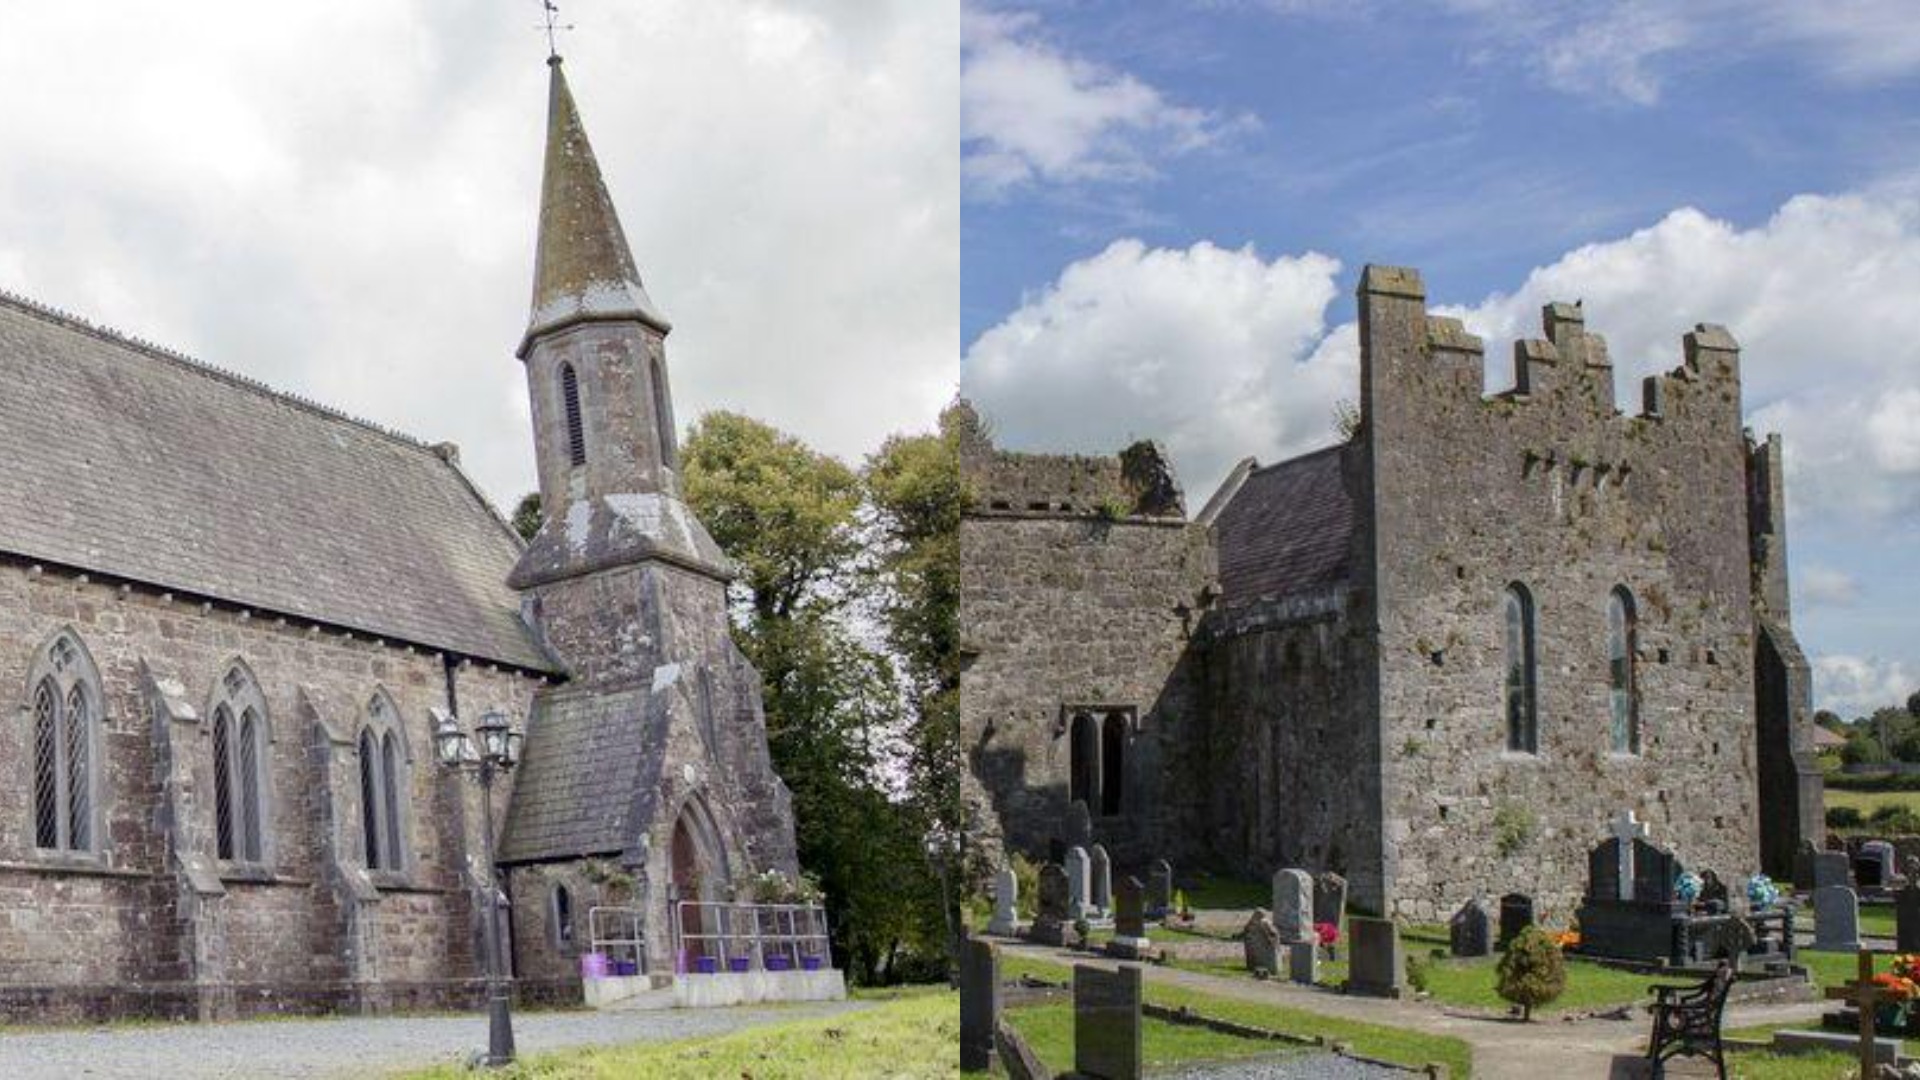 2022 Community Monuments Fund - pictured are the monuments Kilfinnane Church (left) and Kilmallock Church (right).